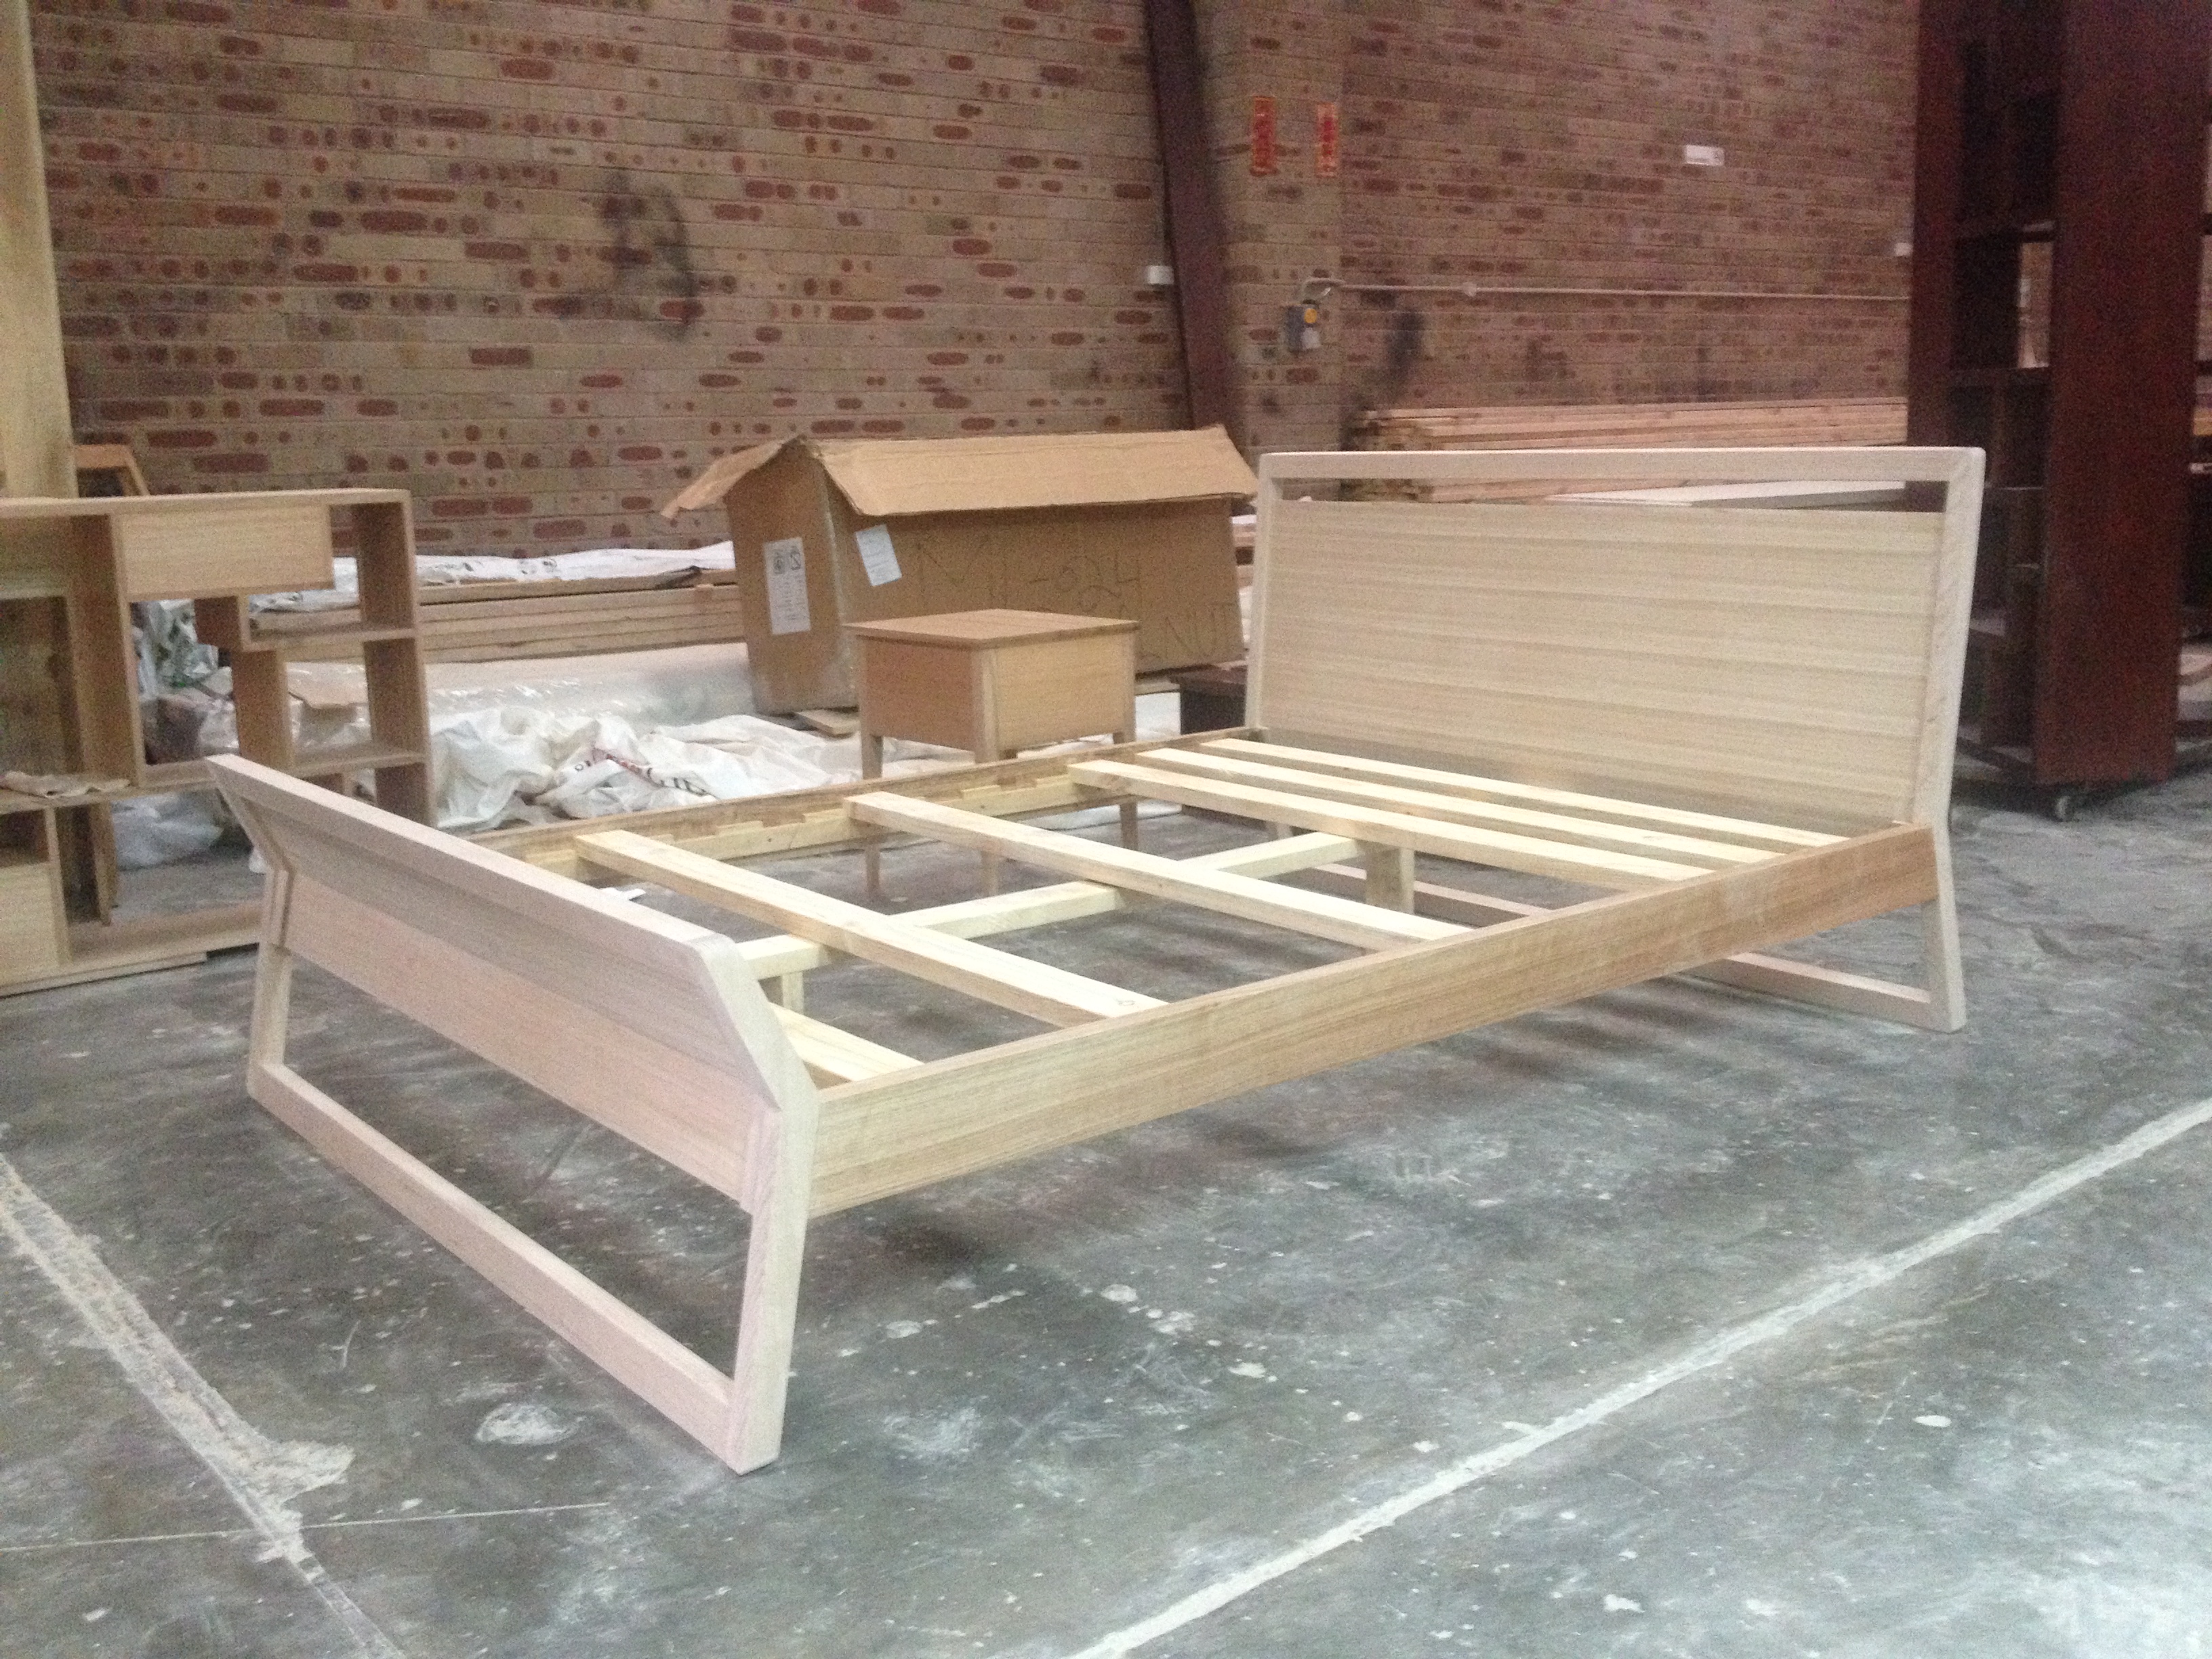 Cube Timber Bed - Handcrafted